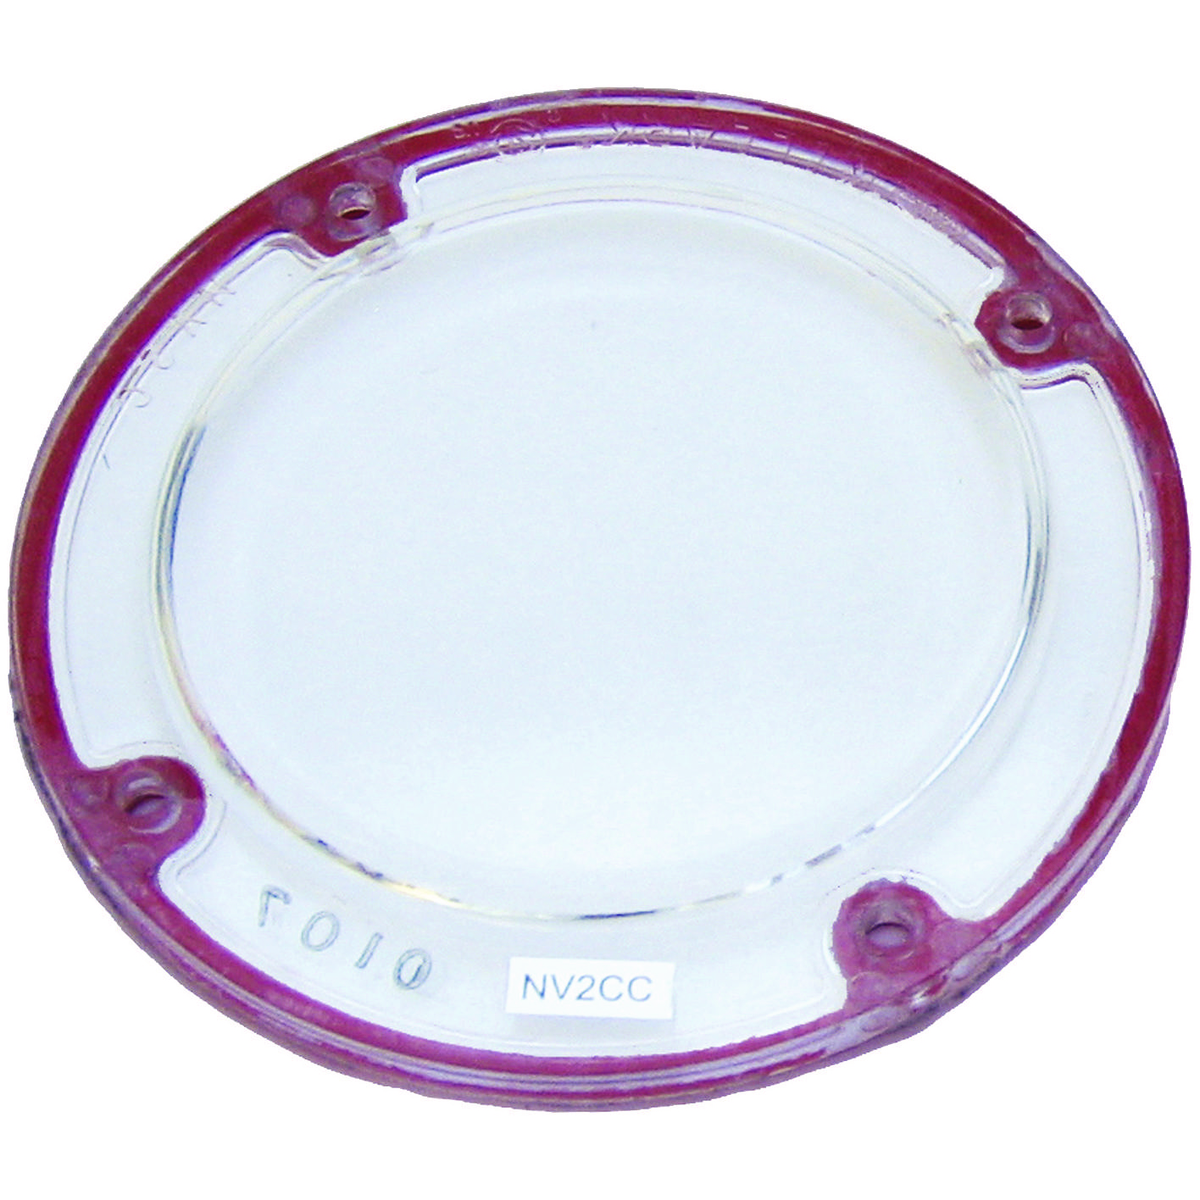 NV2 SERIES - CLEAR NON-METALLIC BLANK COVER FOR NV2XG CEILING BOXES -INCLUDES EXTRA GASKET